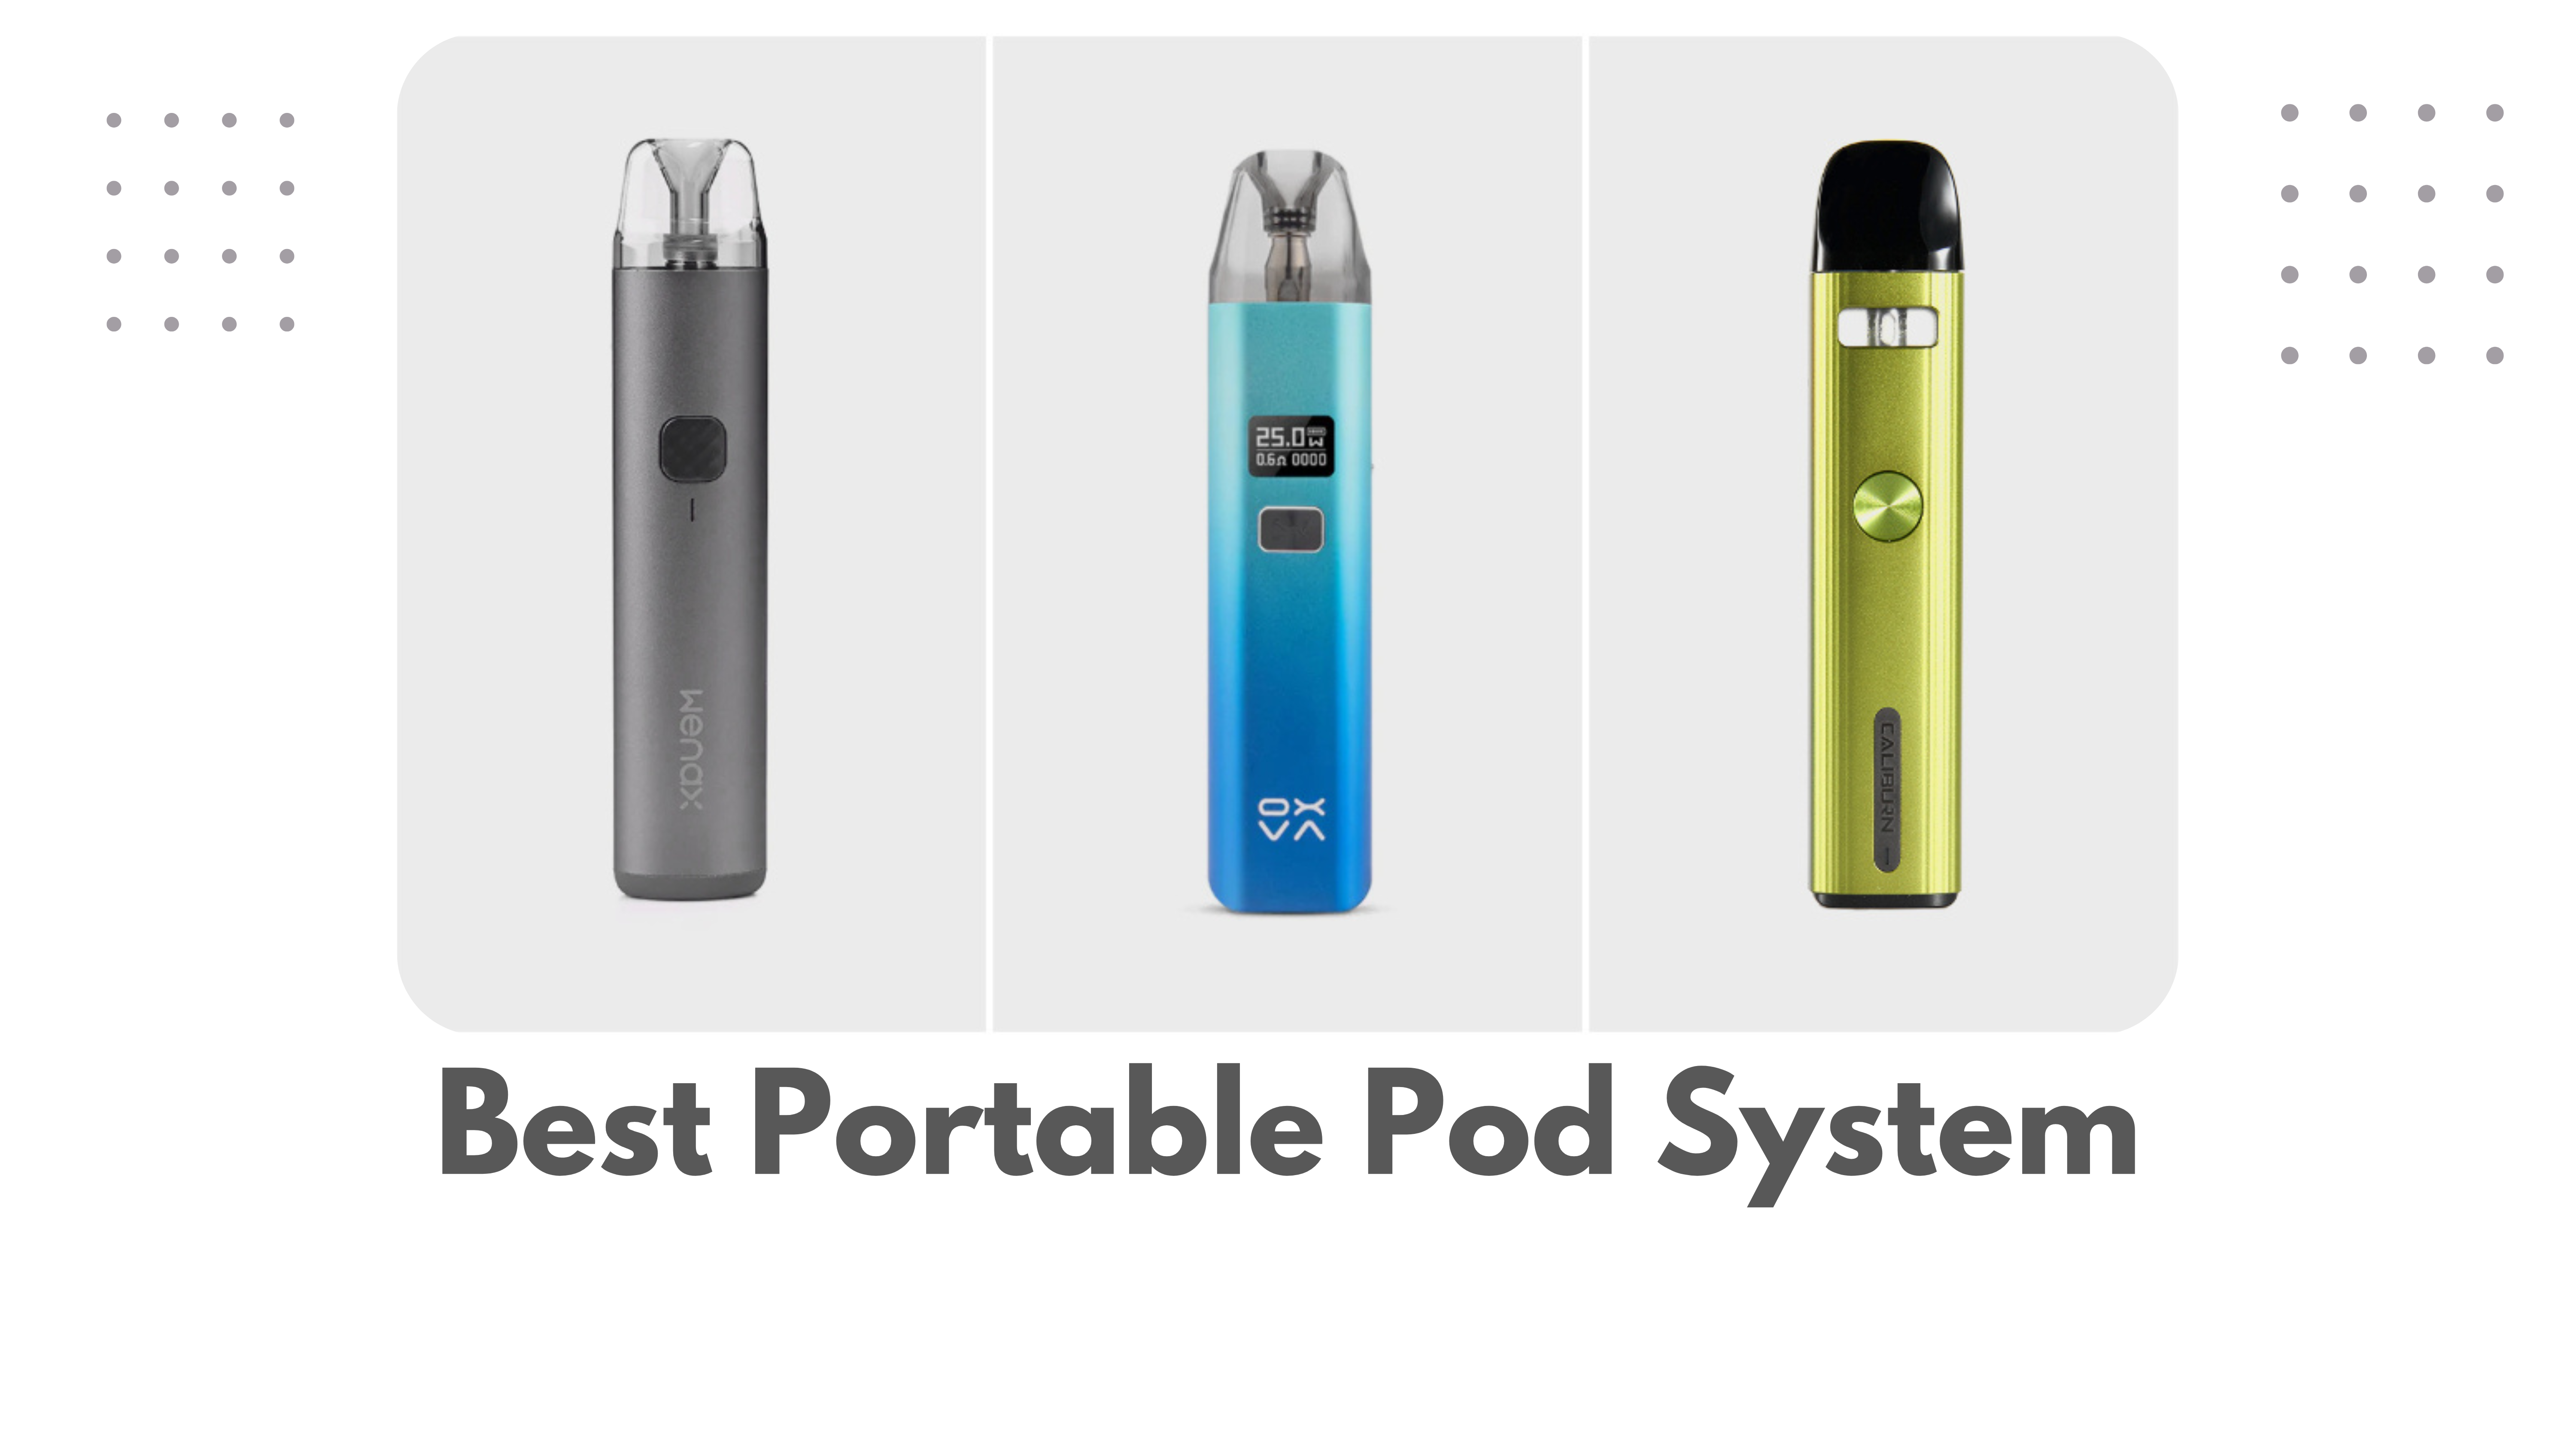 Choose Your Best Portable Pod System in Dubai